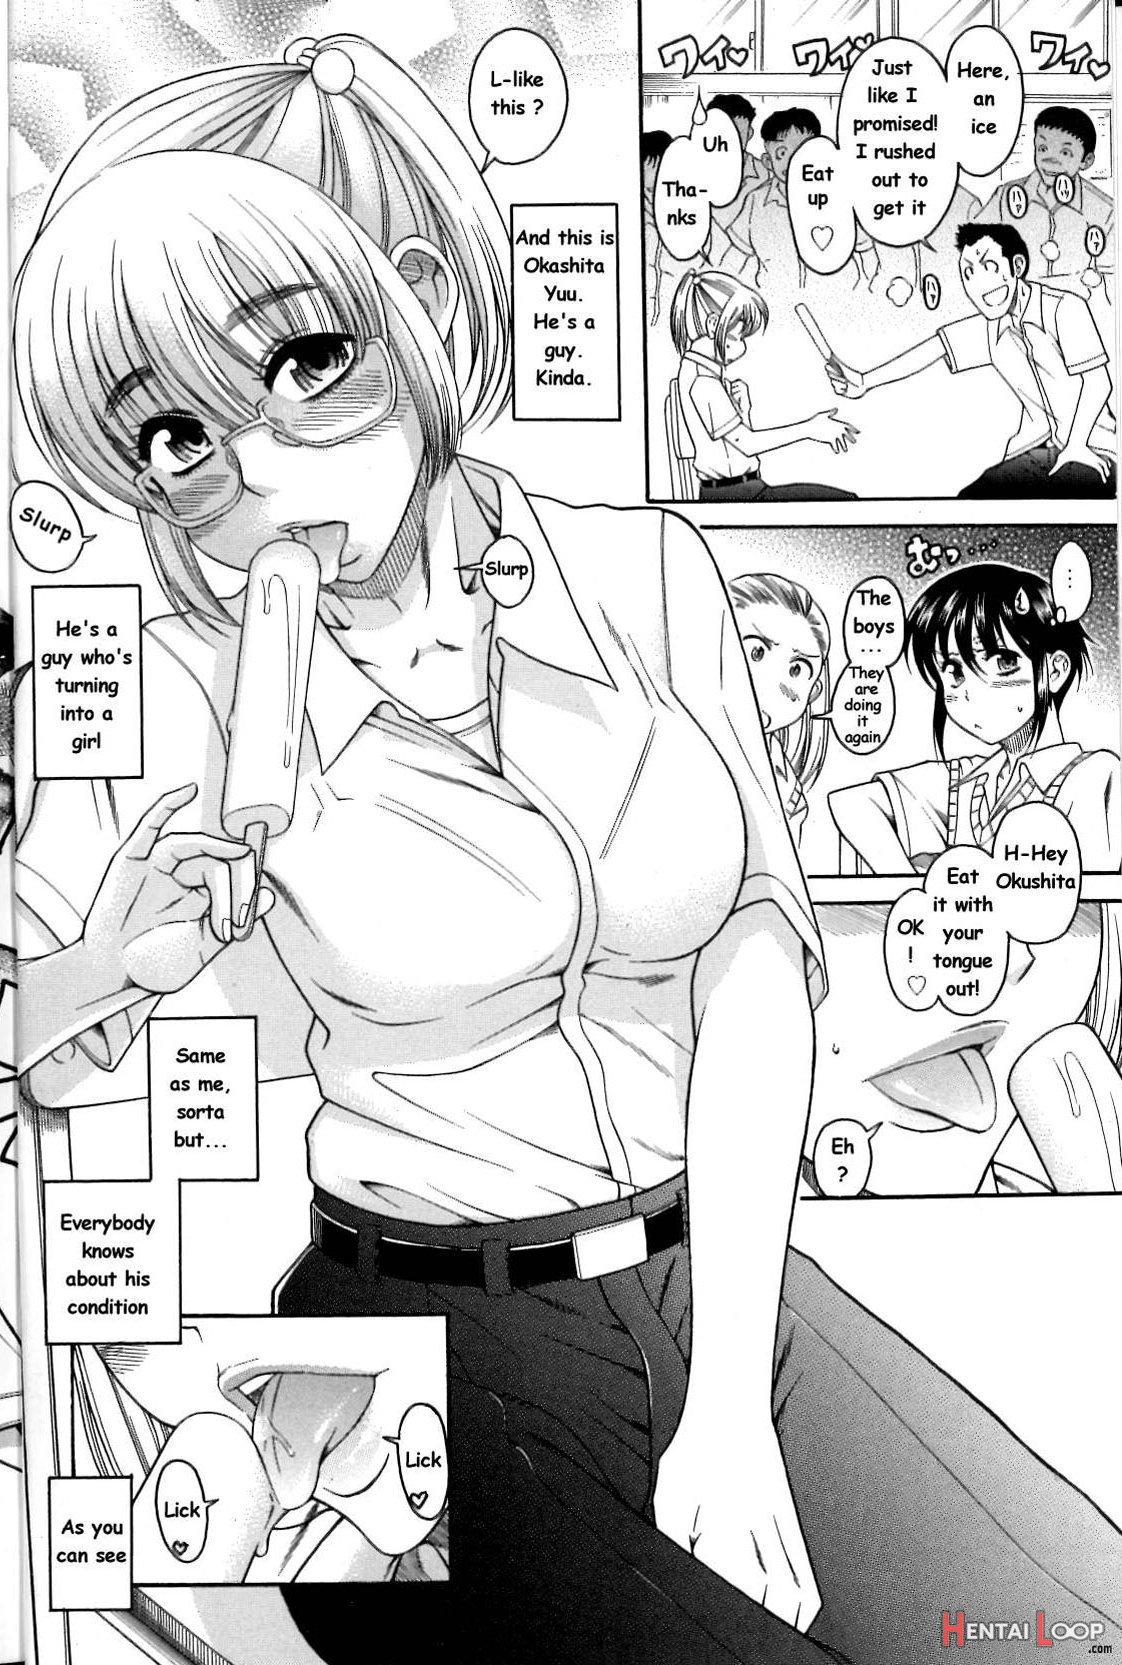 Boy Meets Girl, Girl Meets Boy 2- Single Page Version page 6